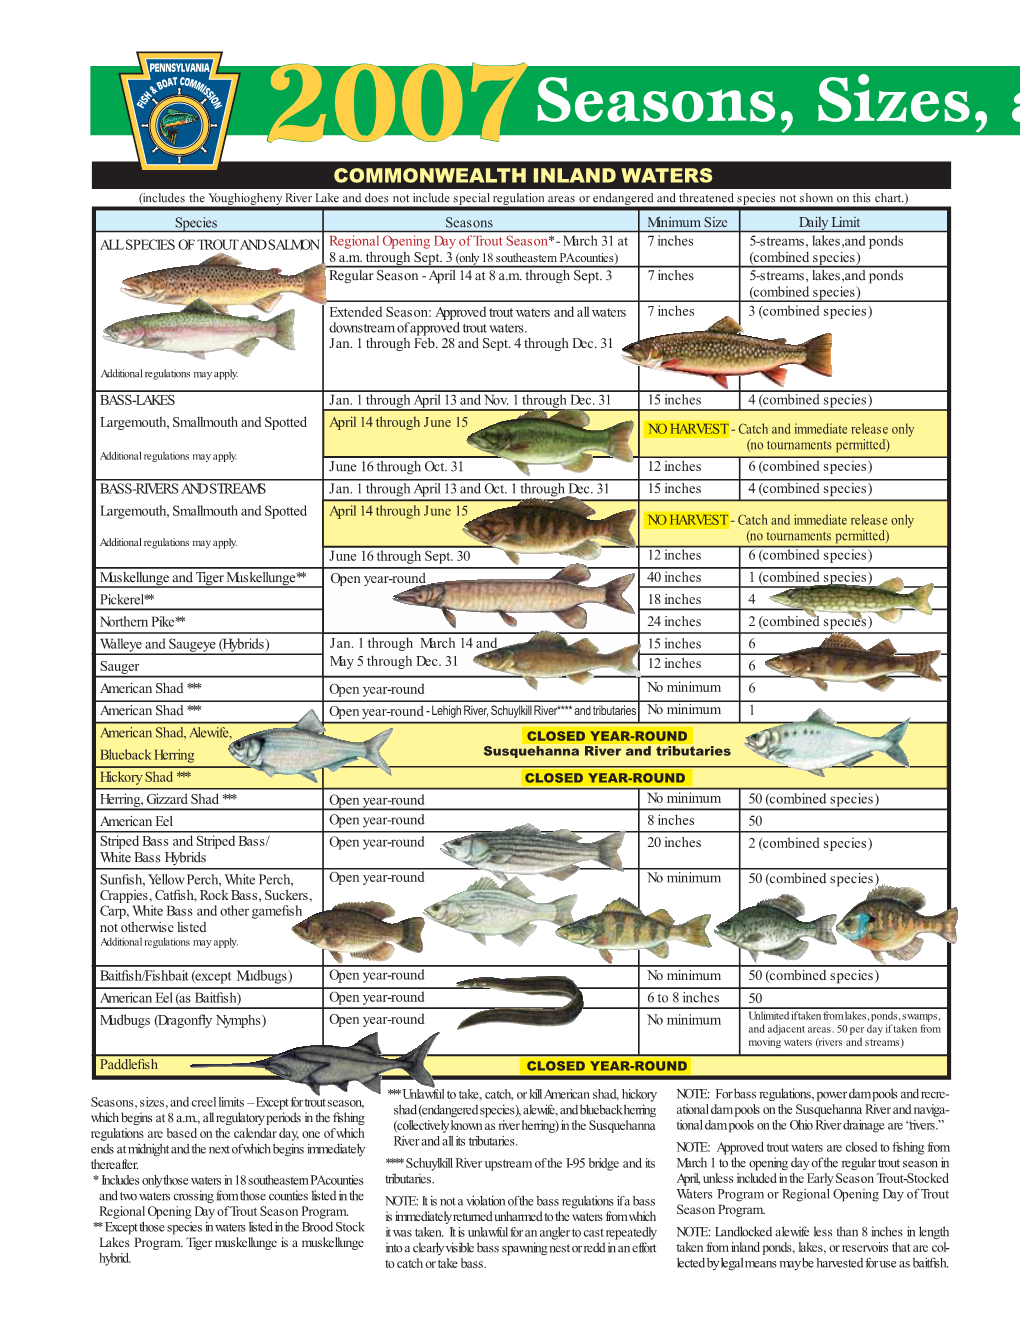 2007 Seasons, Sizes, and Creel Limits